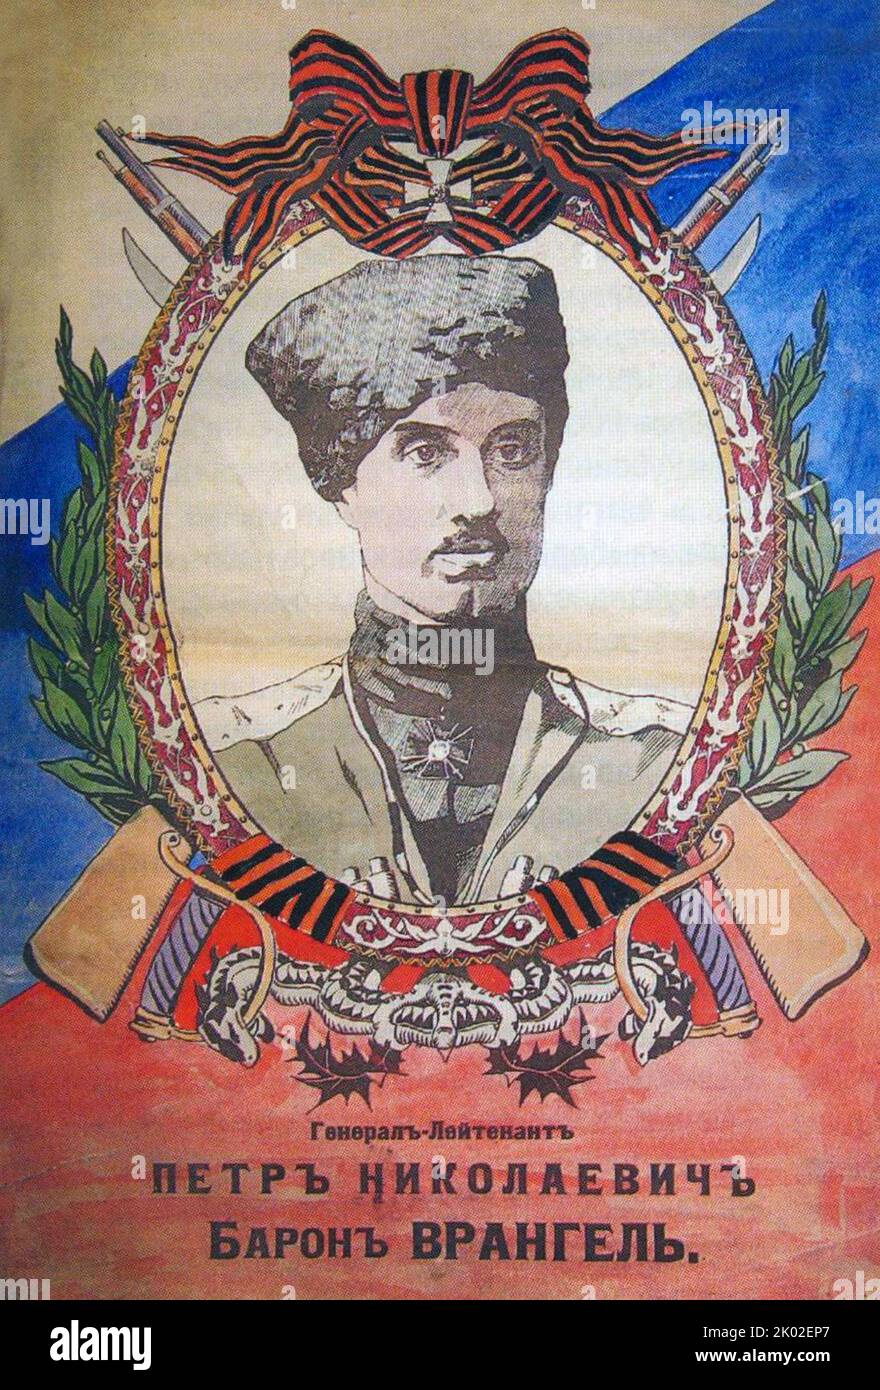 propaganda poster showing General Pyotr Nikolayevich Wrangel (1878 - 1928); During the later stages of the Russian Civil War, he was commanding general of the anti-Bolshevik White Army in Southern Russia. 1919 Stock Photo